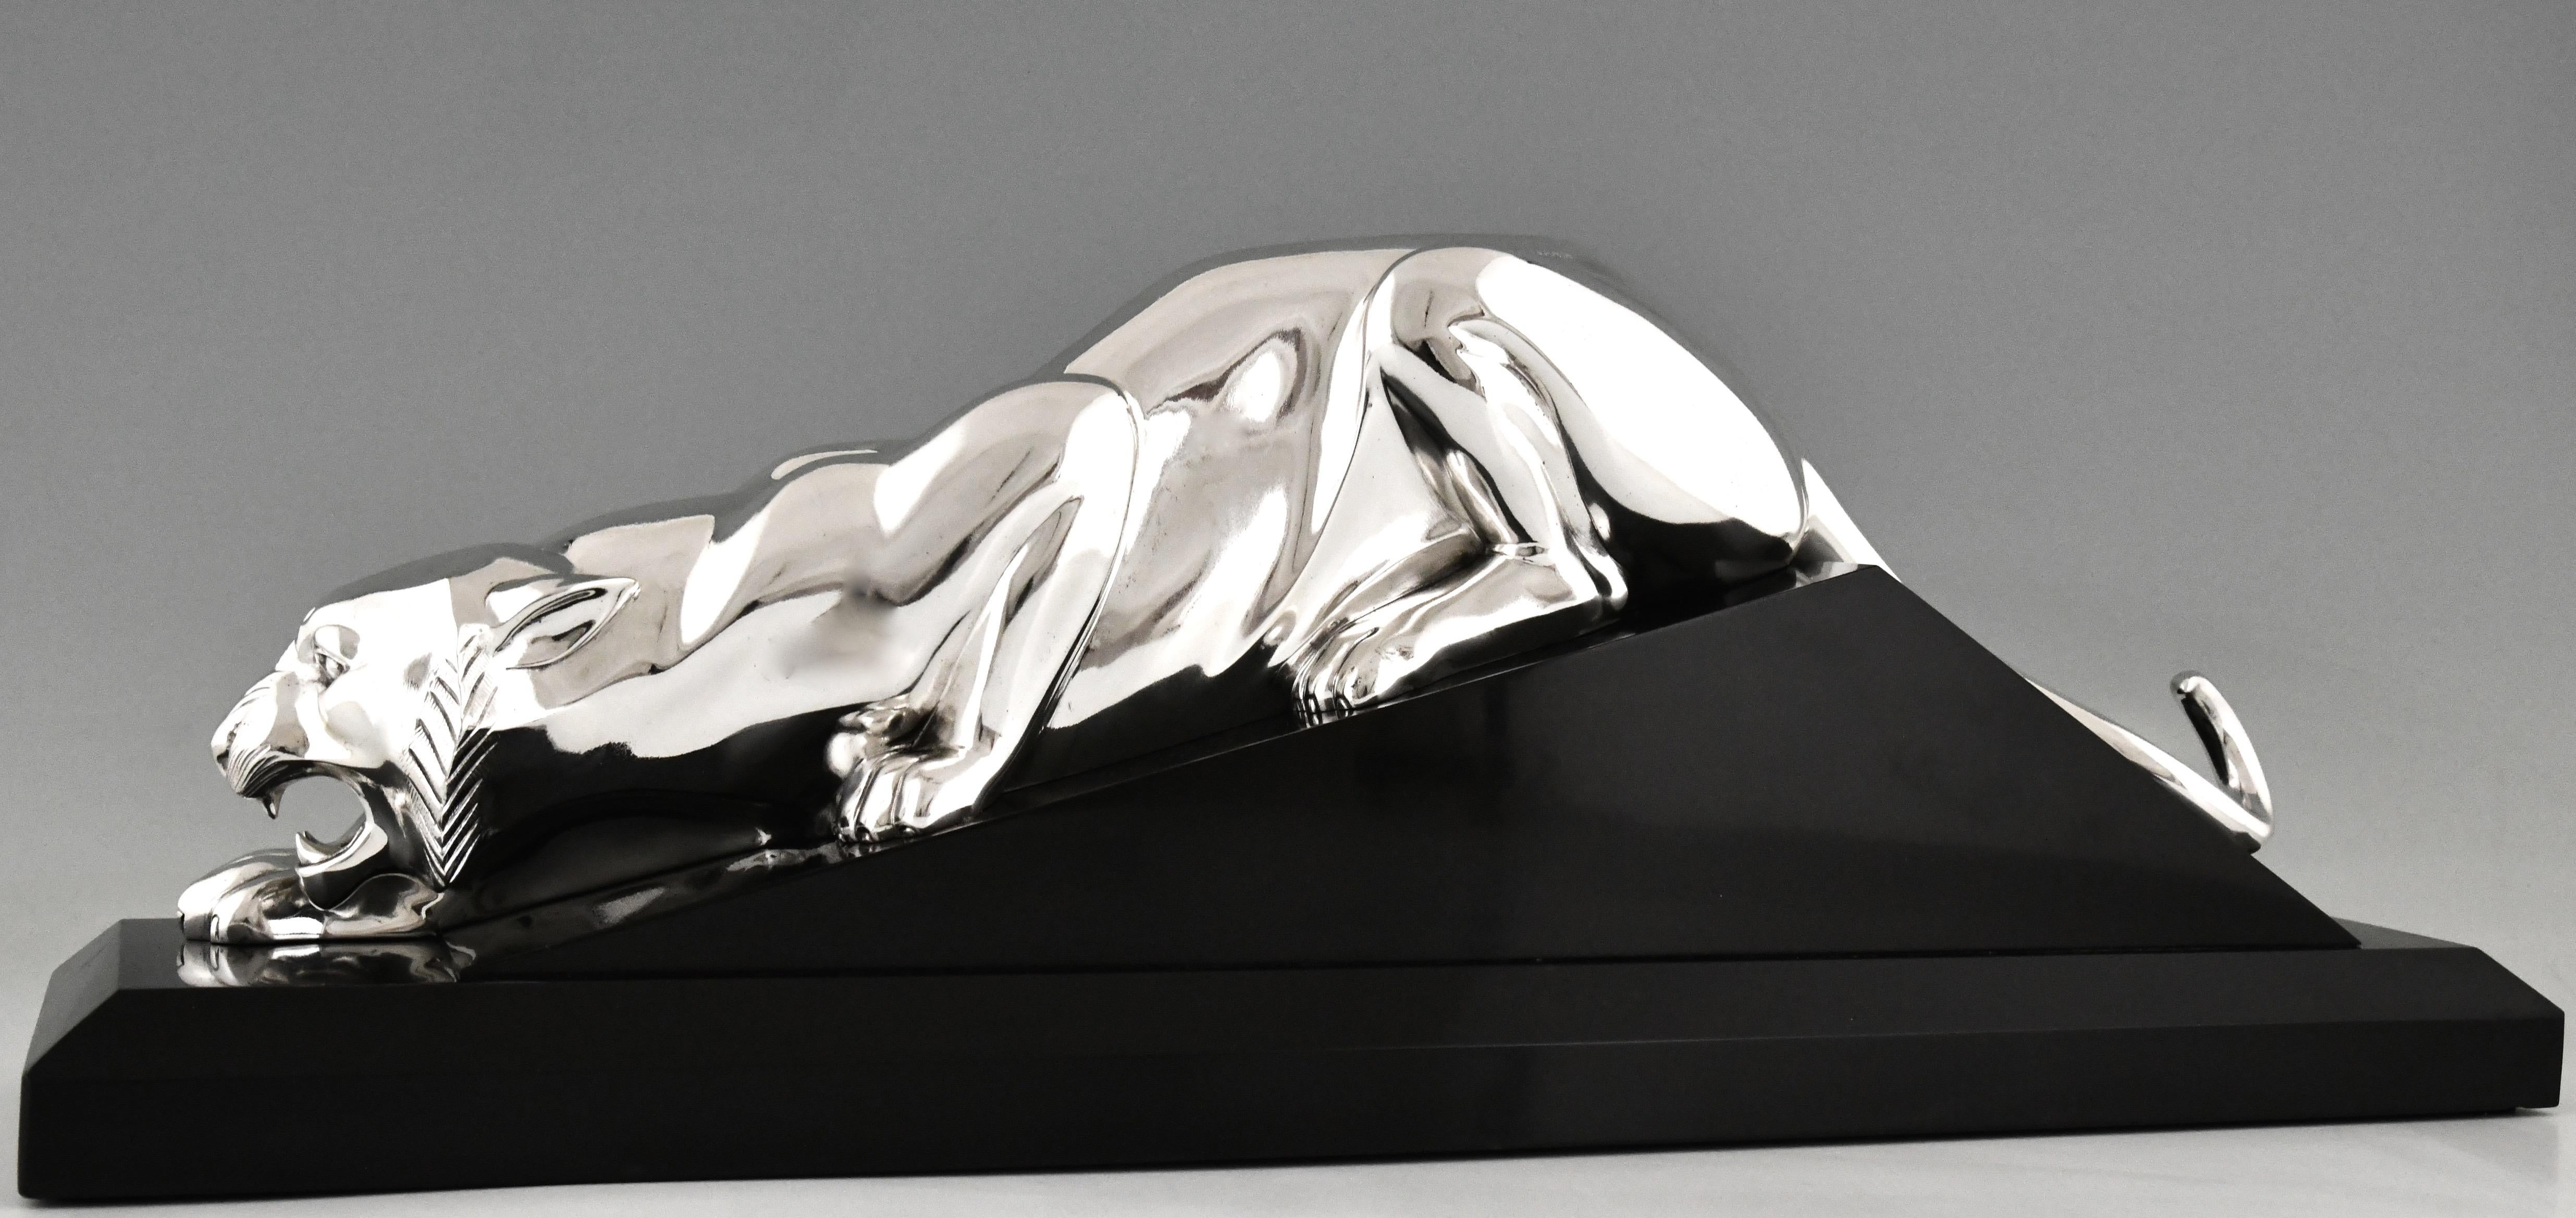 Art Deco silvered bronze sculpture of a panther by Georges Lavroff. 
The artist was born in Russia in 1895, lived and worked in France. 
The bronze statue is mounted on a Belgian Black marble base. France 1925.

This panther is illustrated in